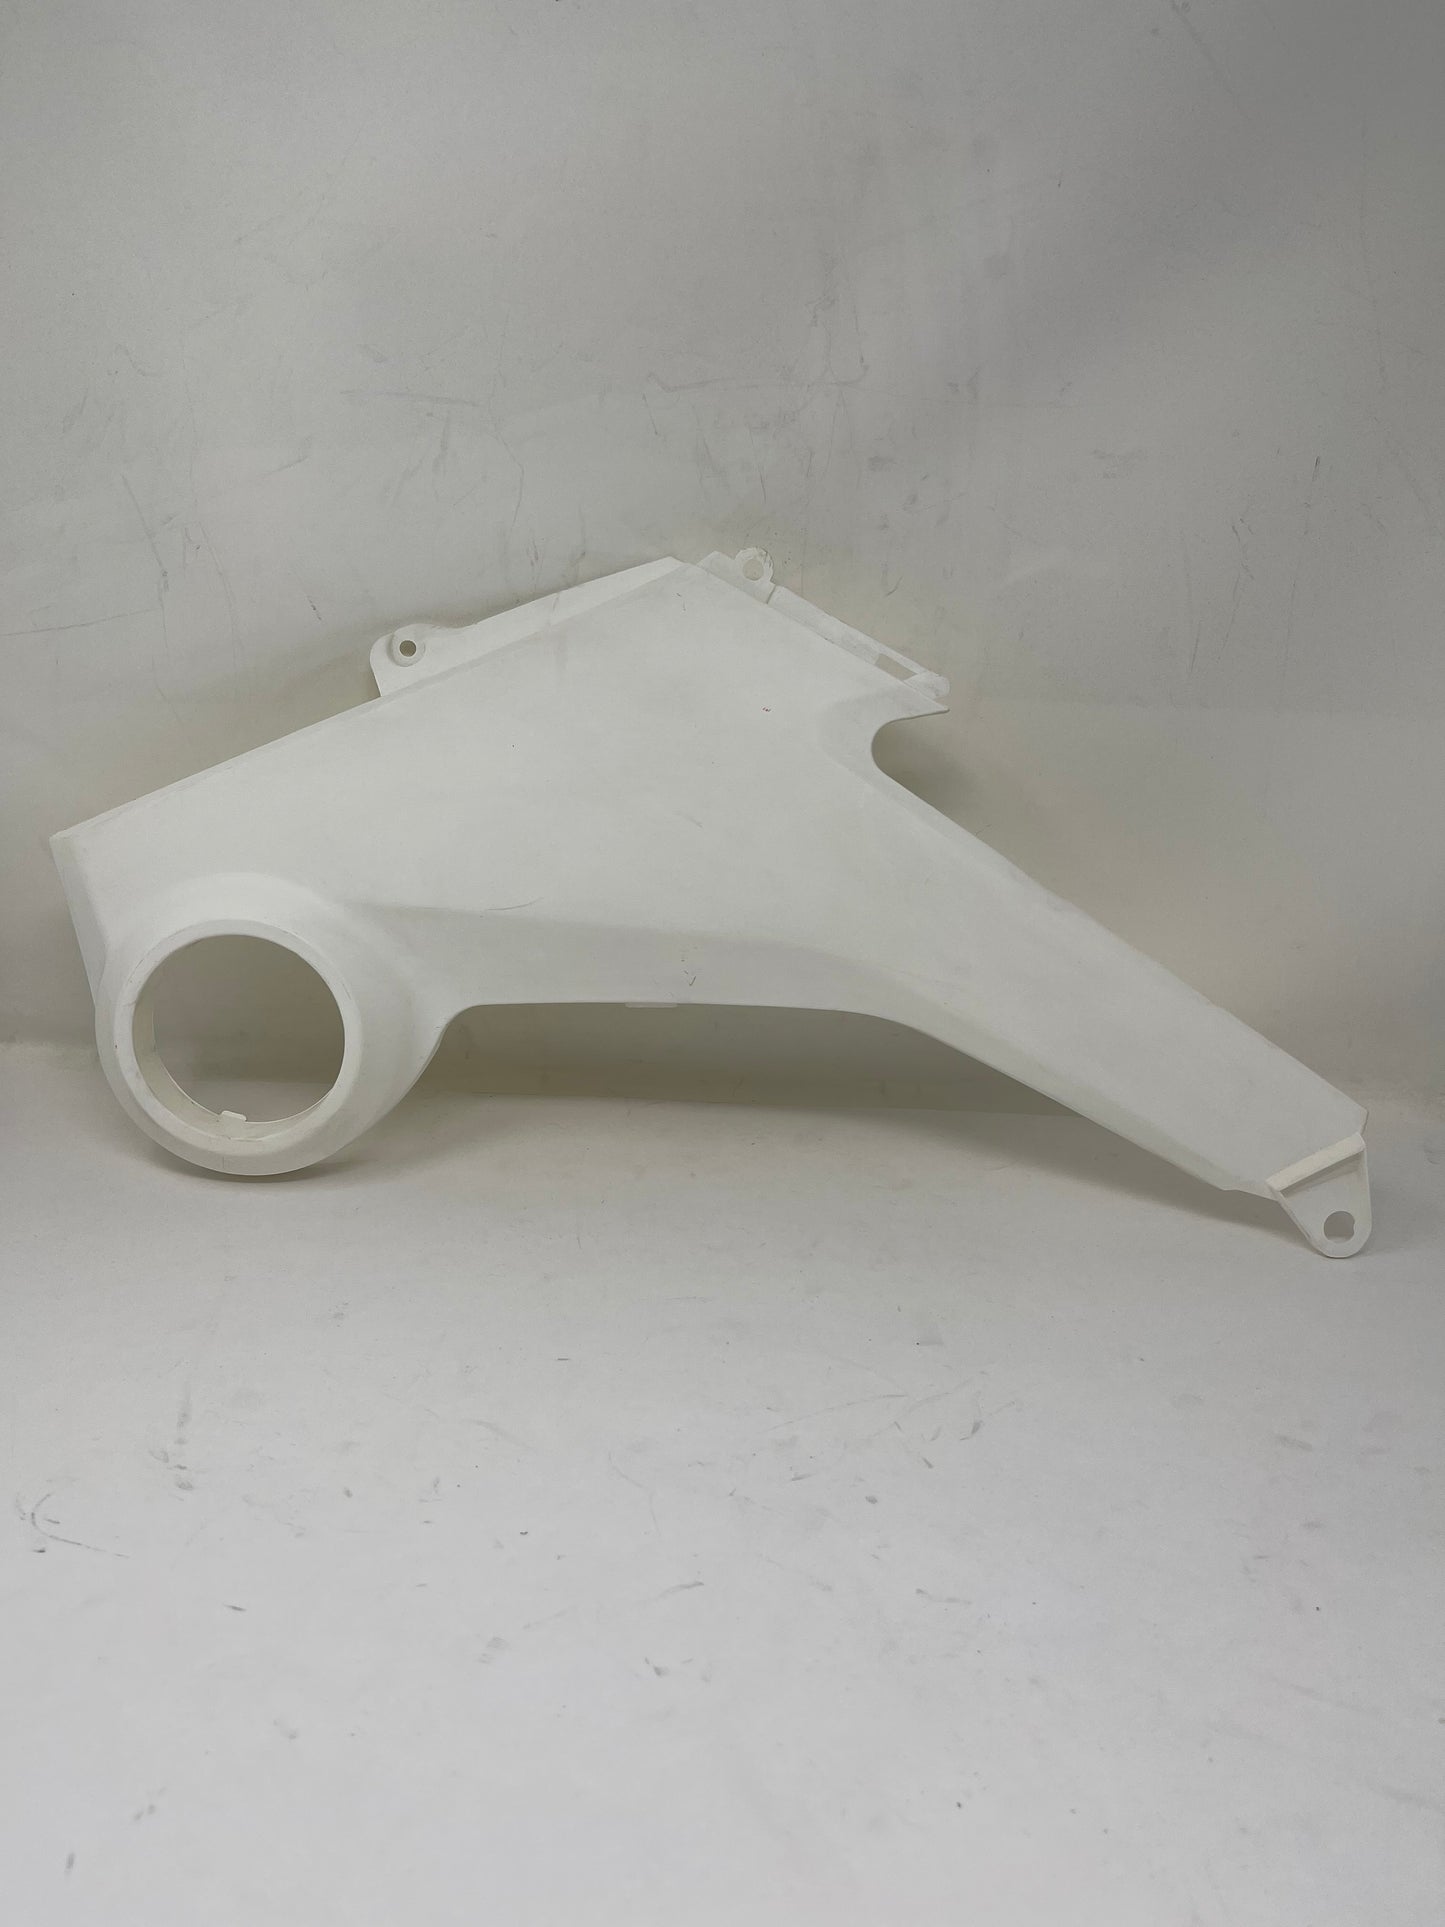 BD578Z right seat lock fairing for sale.